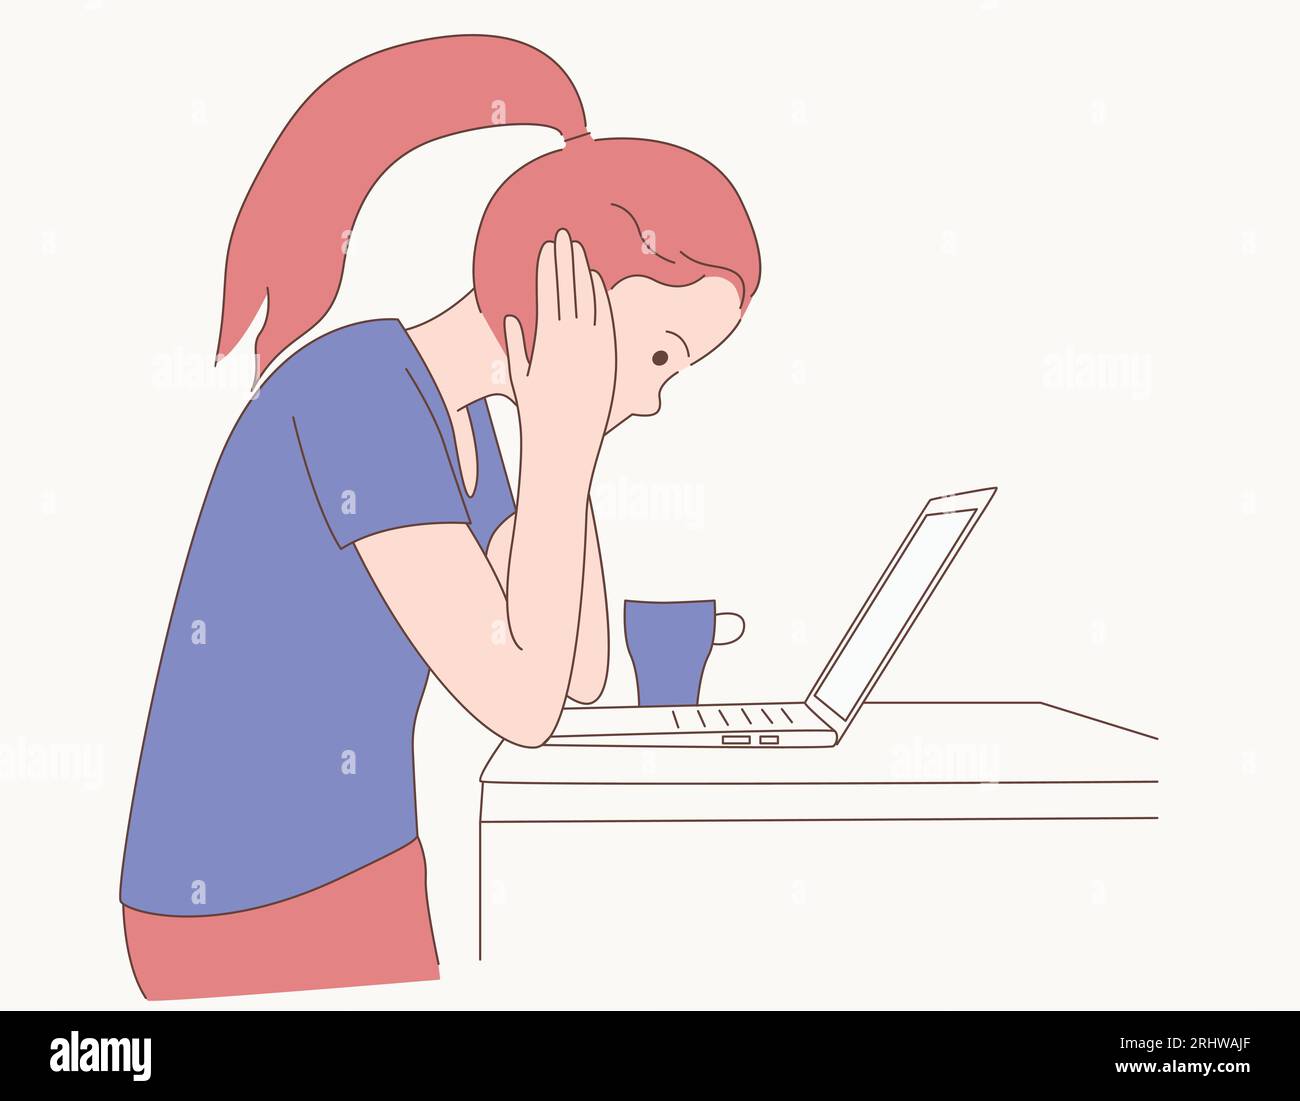 Woman Contemplating while Using Laptop Illustration Stock Vector